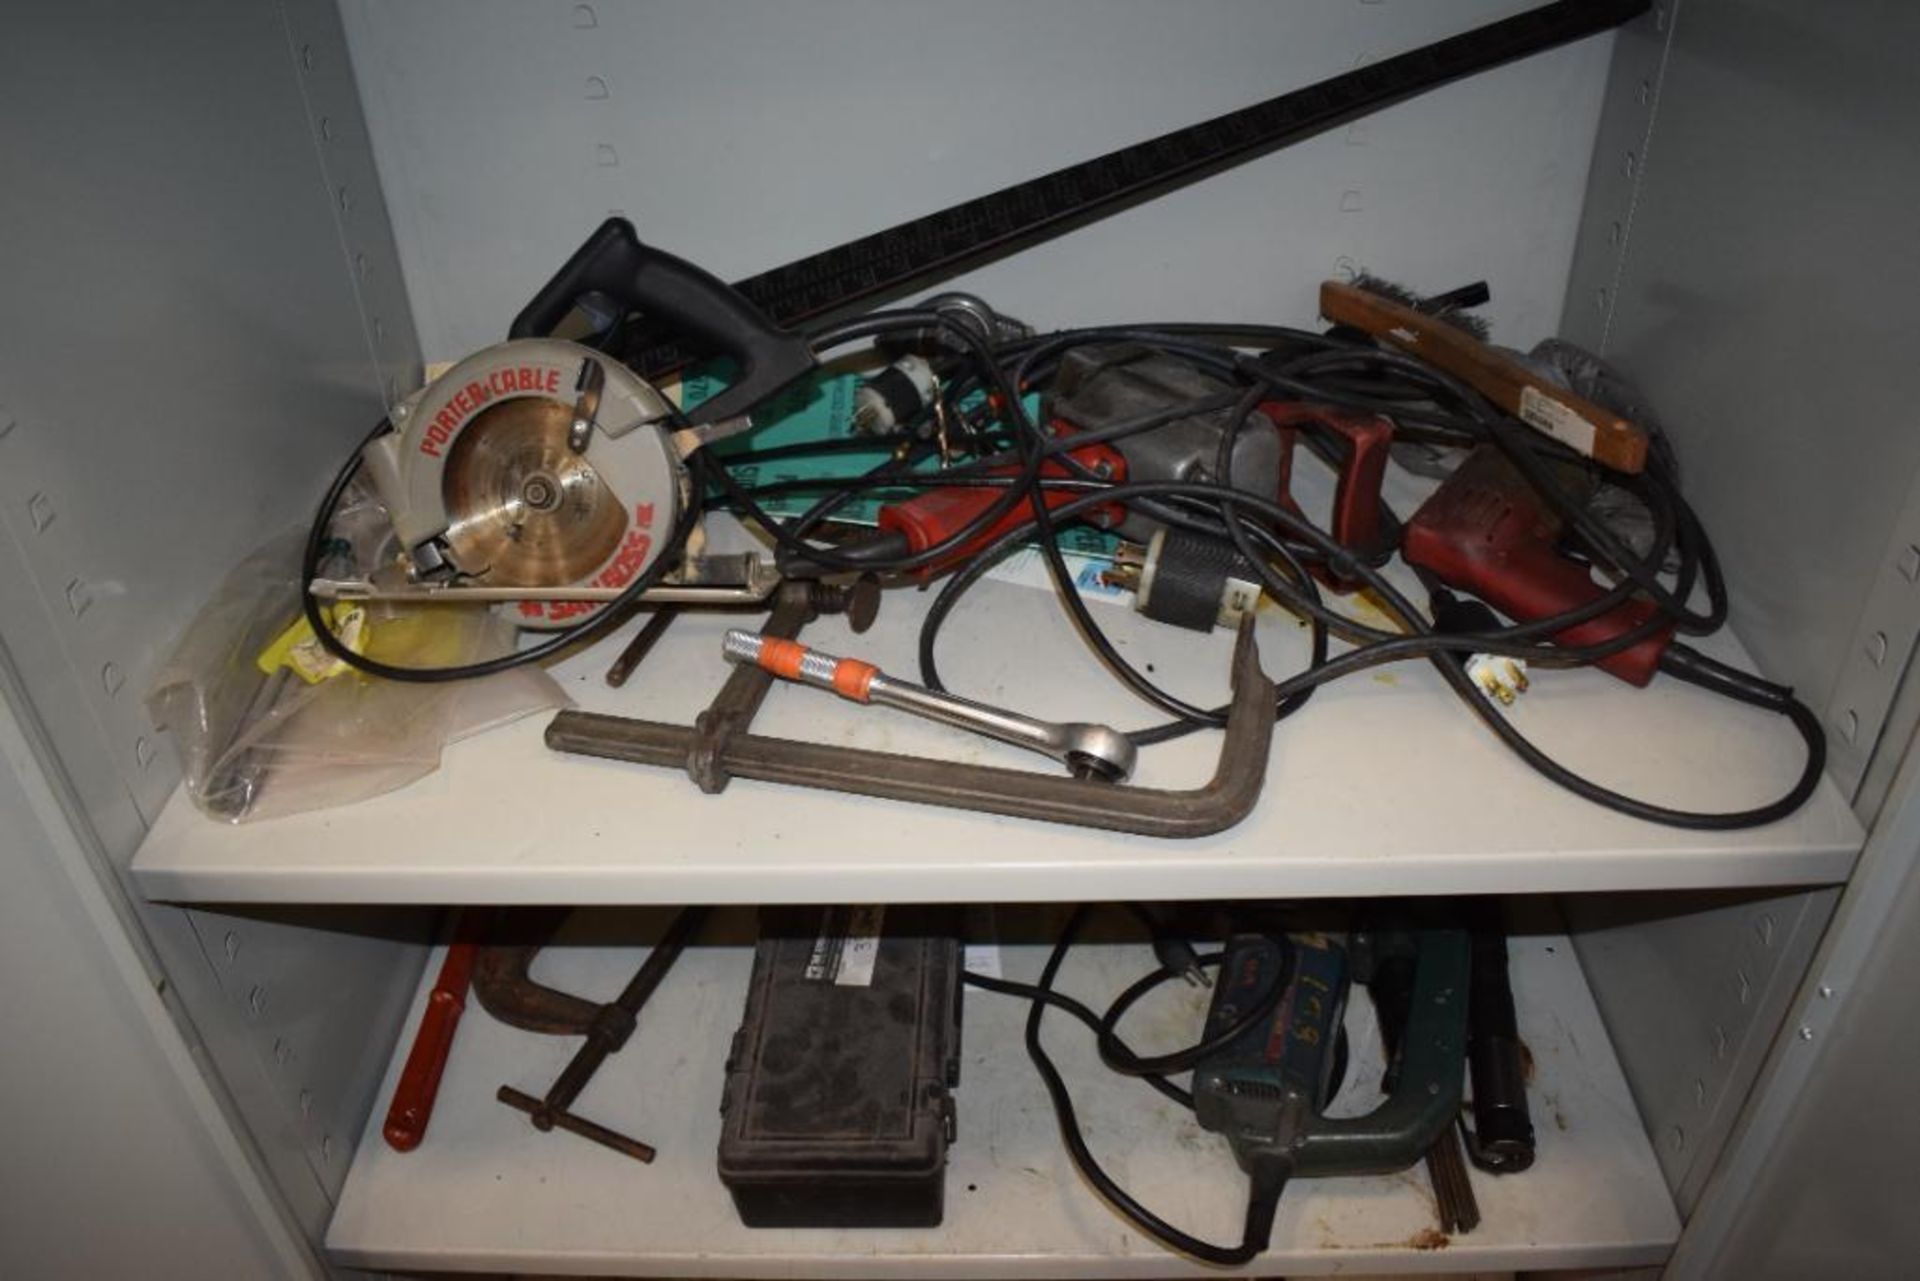 Lot Consisting Of: (1) 2 Door metal cabinets with miscellaneous tools, including saw, batteries, met - Image 5 of 10